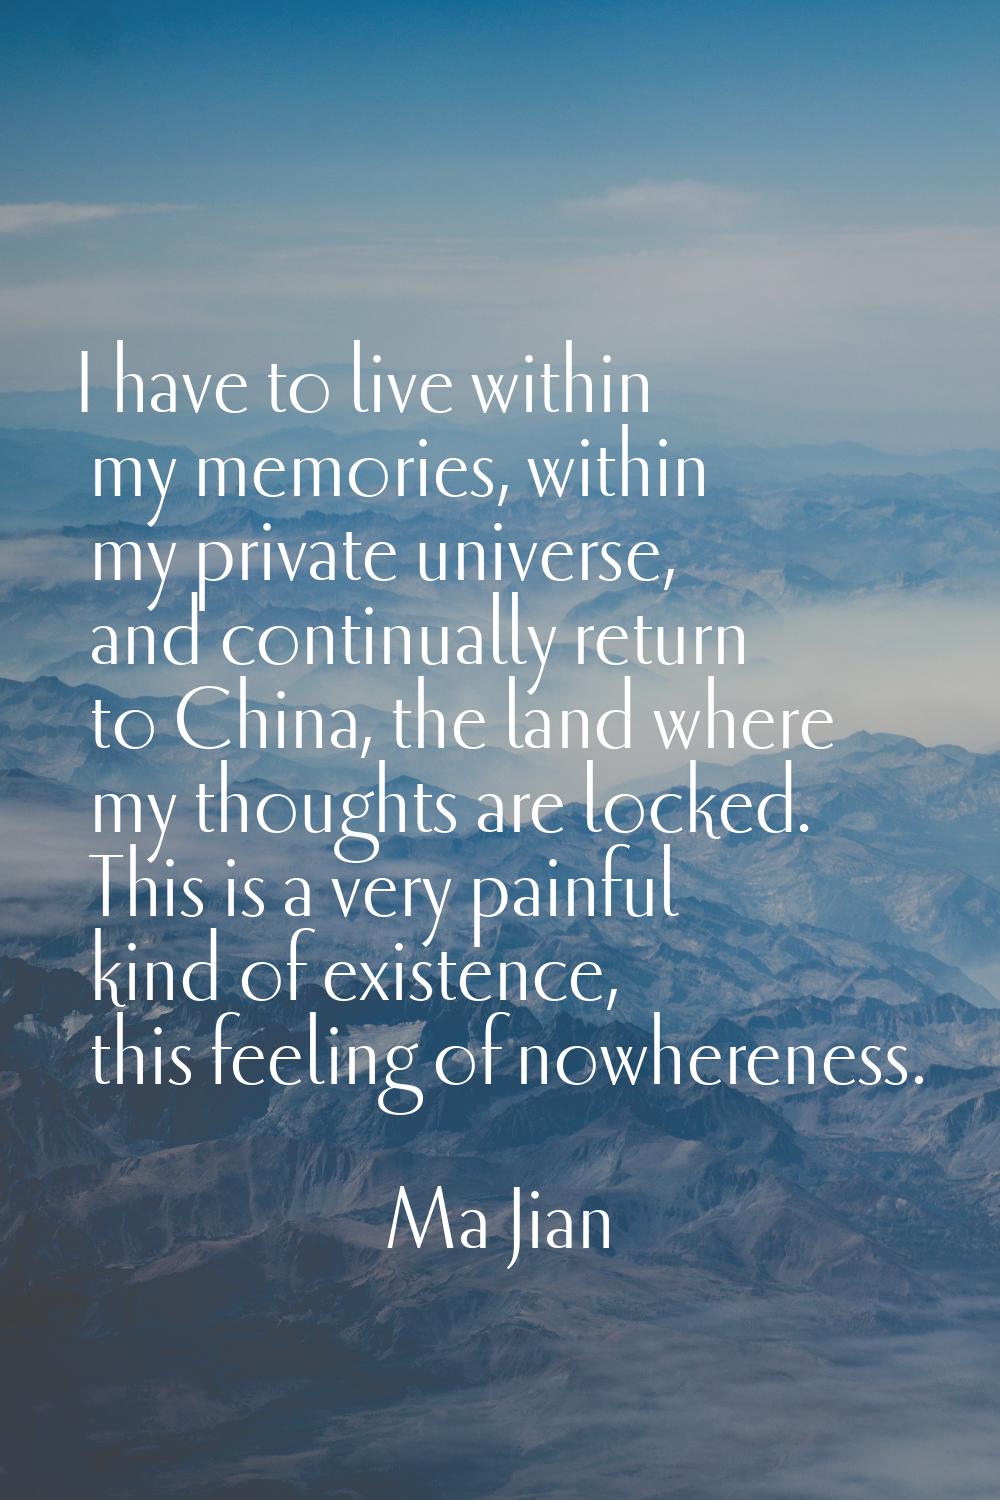 I have to live within my memories, within my private universe, and continually return to China, the